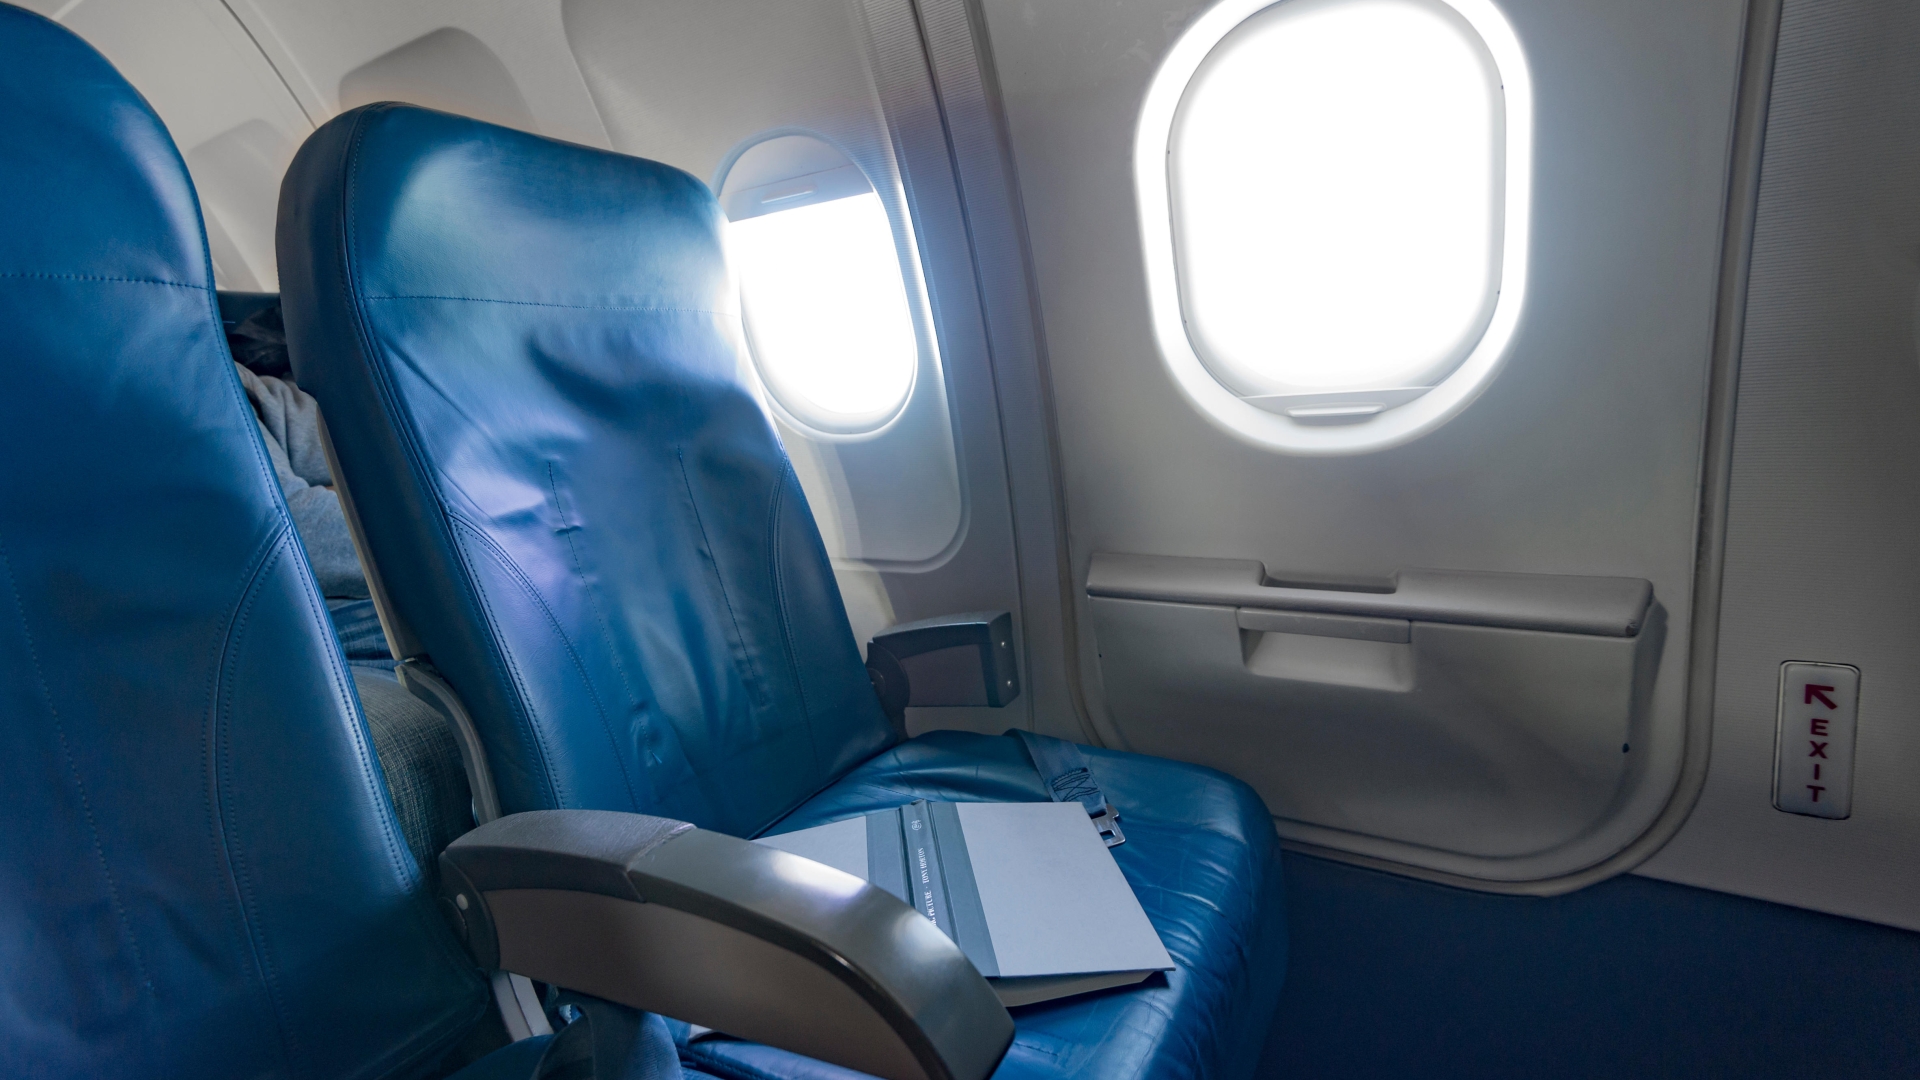 Man splits opinions after refusing to get out of the window seat, despite another passenger paying for it